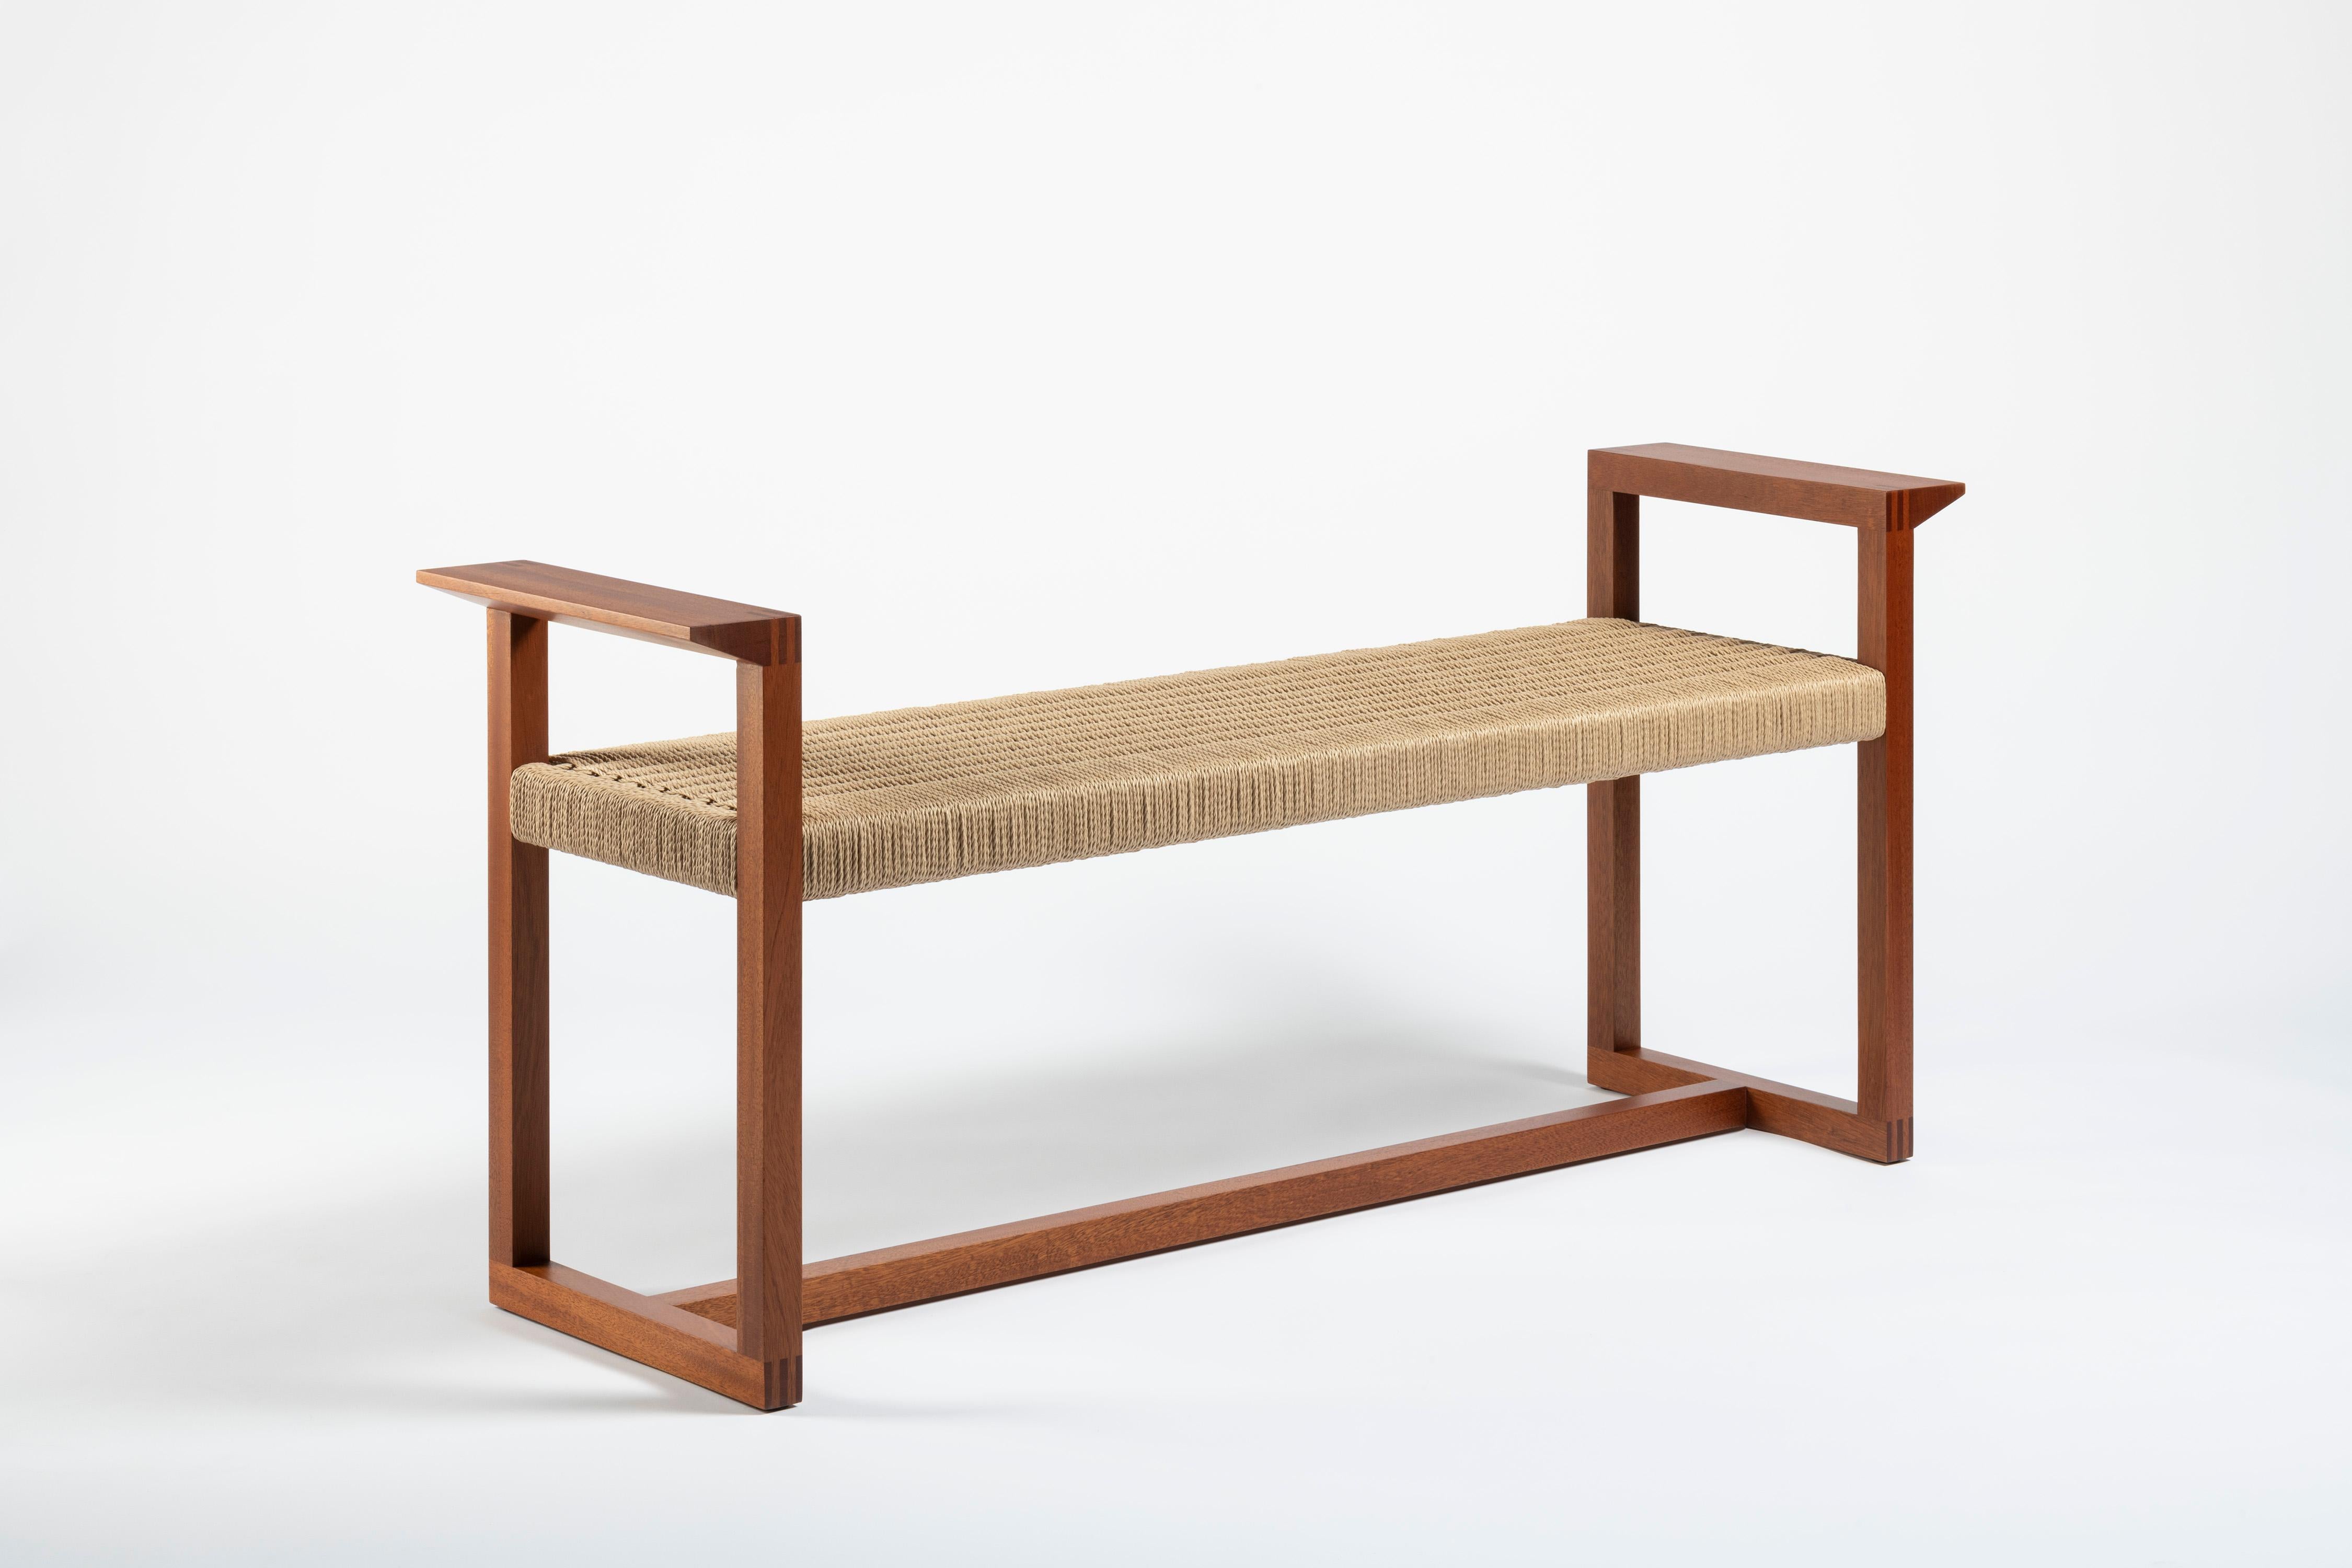 This bench is part of Vitruvio collection that has been developed in cooperation with CMP design studio. We worked together in my workshop combining creative thinking with manufacturing heritage and the result is a project in which the match between